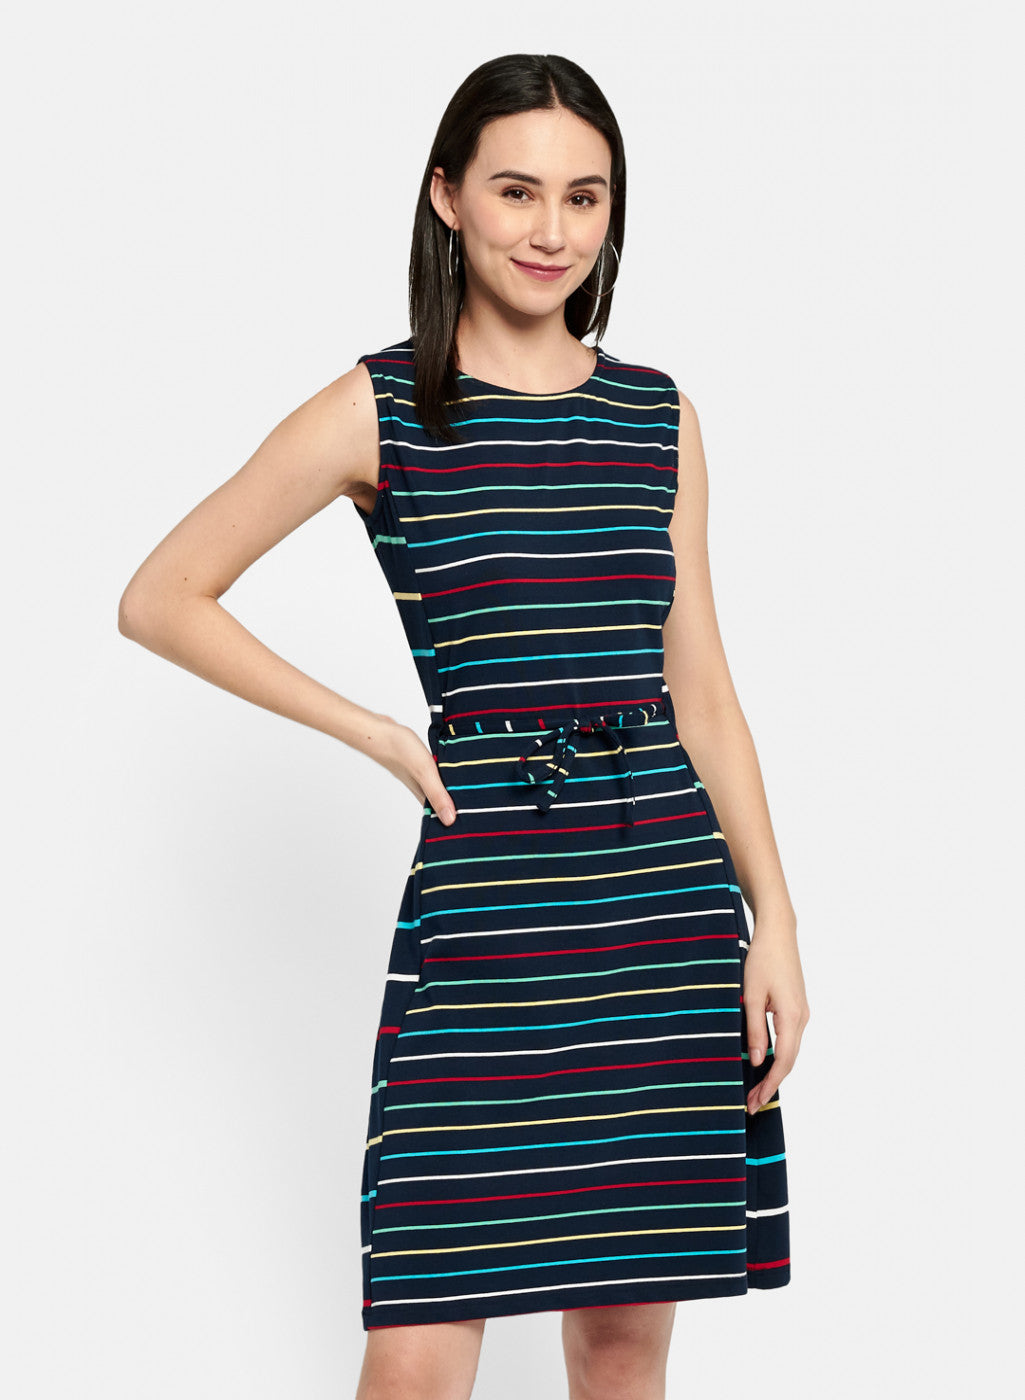 Striped Dresses - Buy Striped Dresses online in India